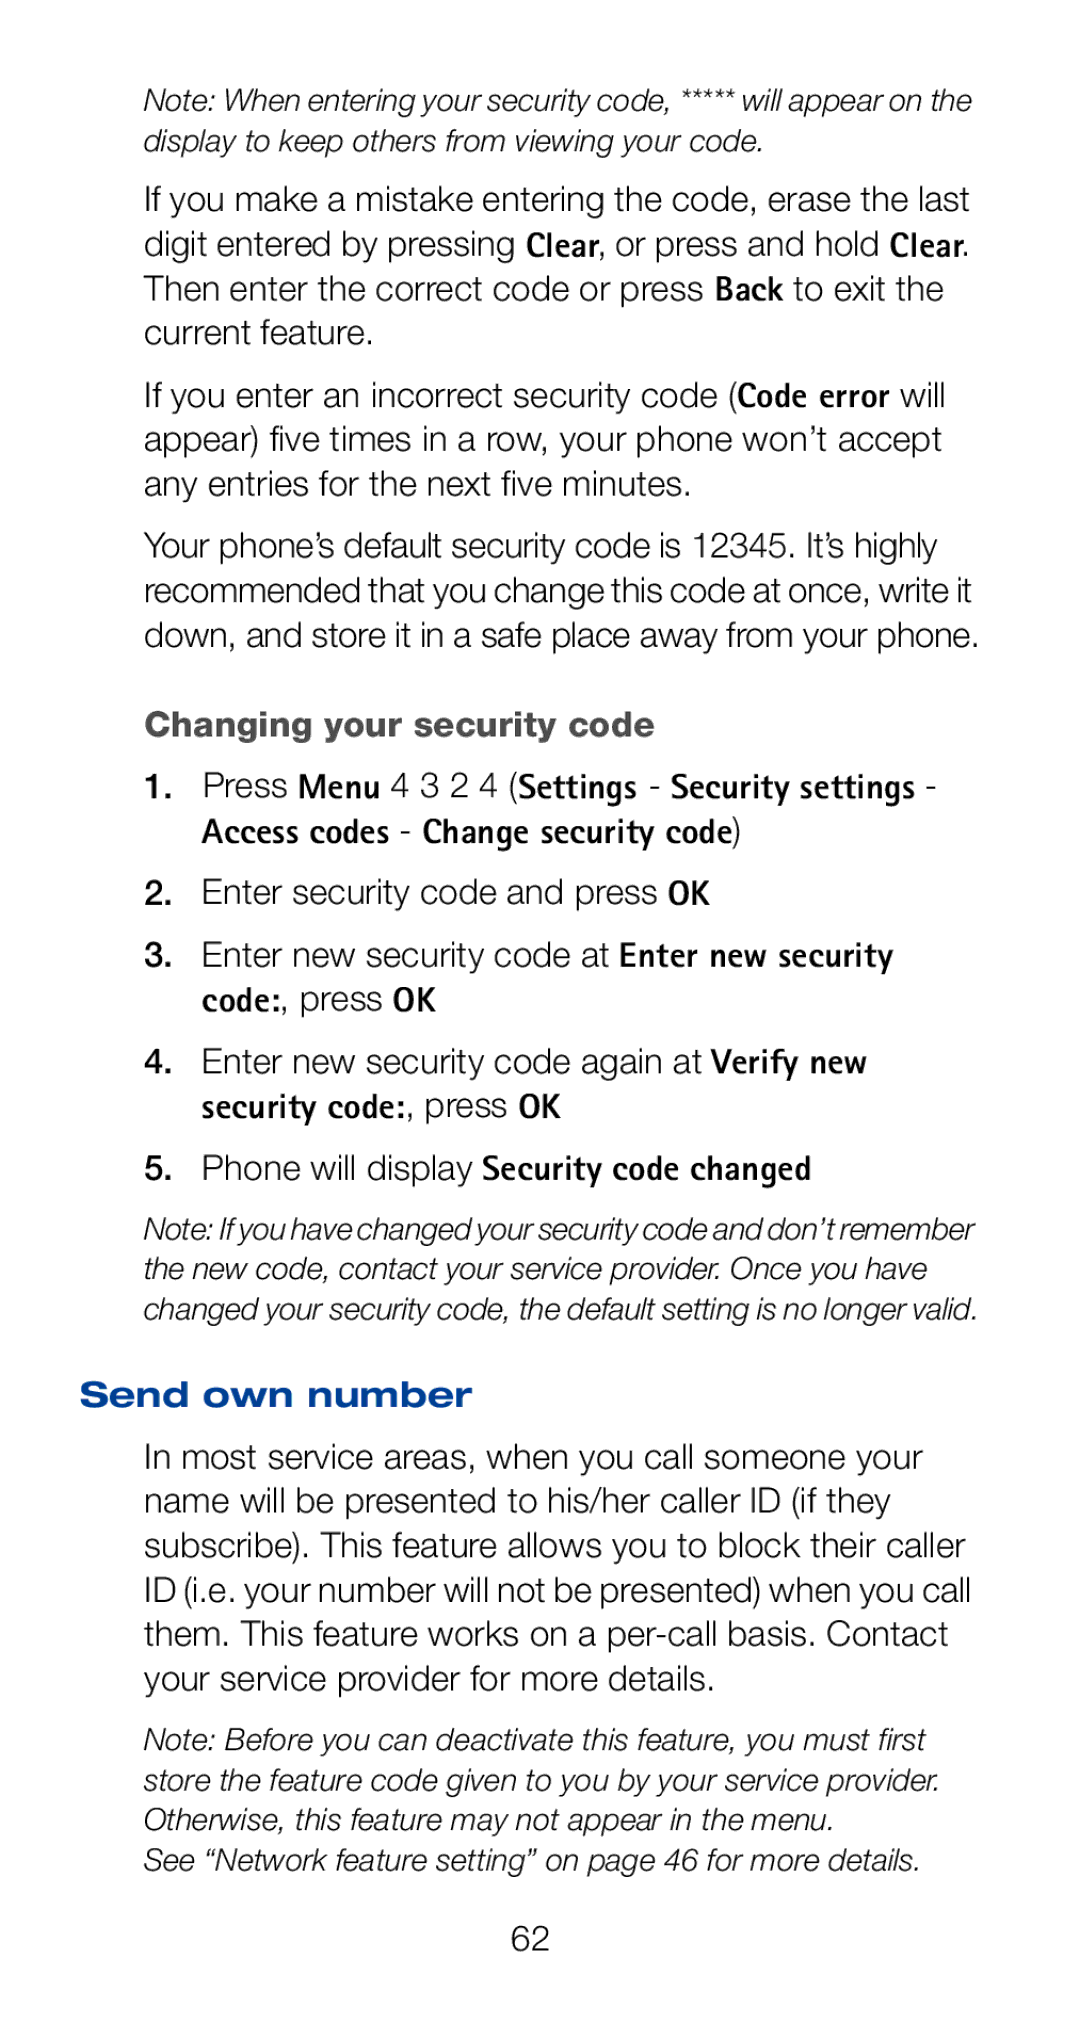 Nokia 6161i owner manual Changing your security code, Phone will display Security code changed, Send own number 